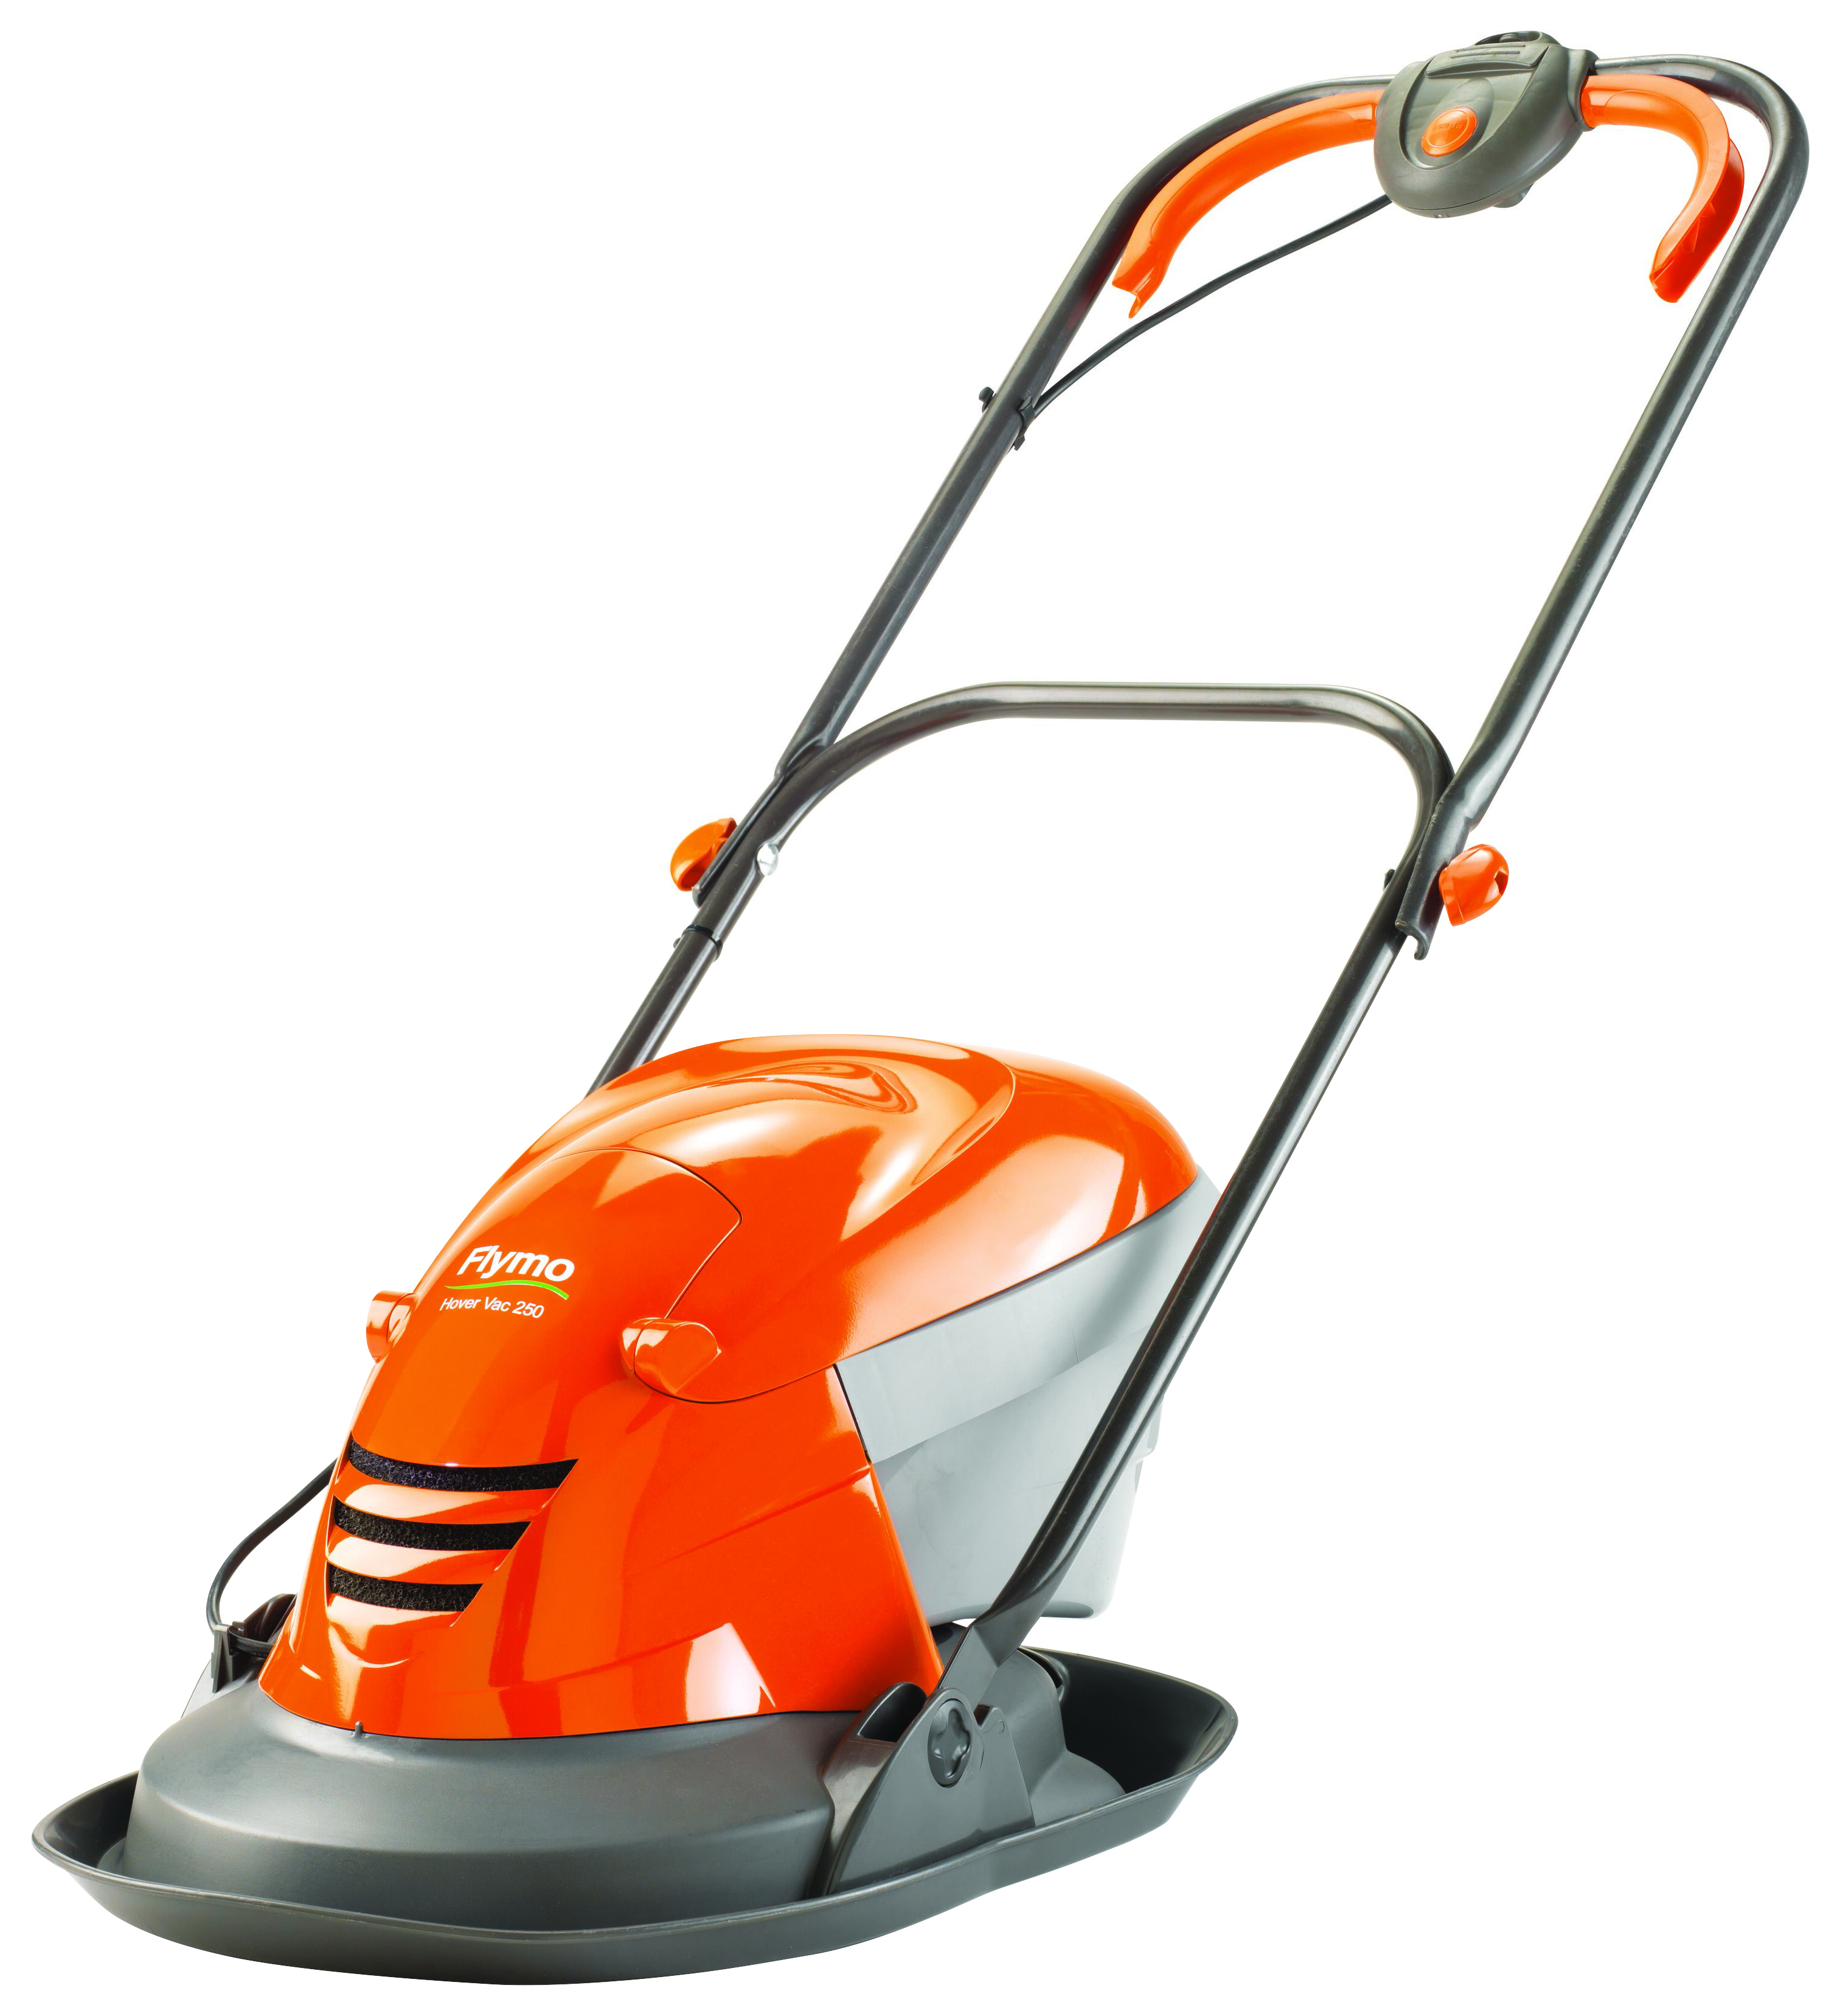 Flymo Hover Vac 250 Corded Hover Collect Lawnmower - 1400W